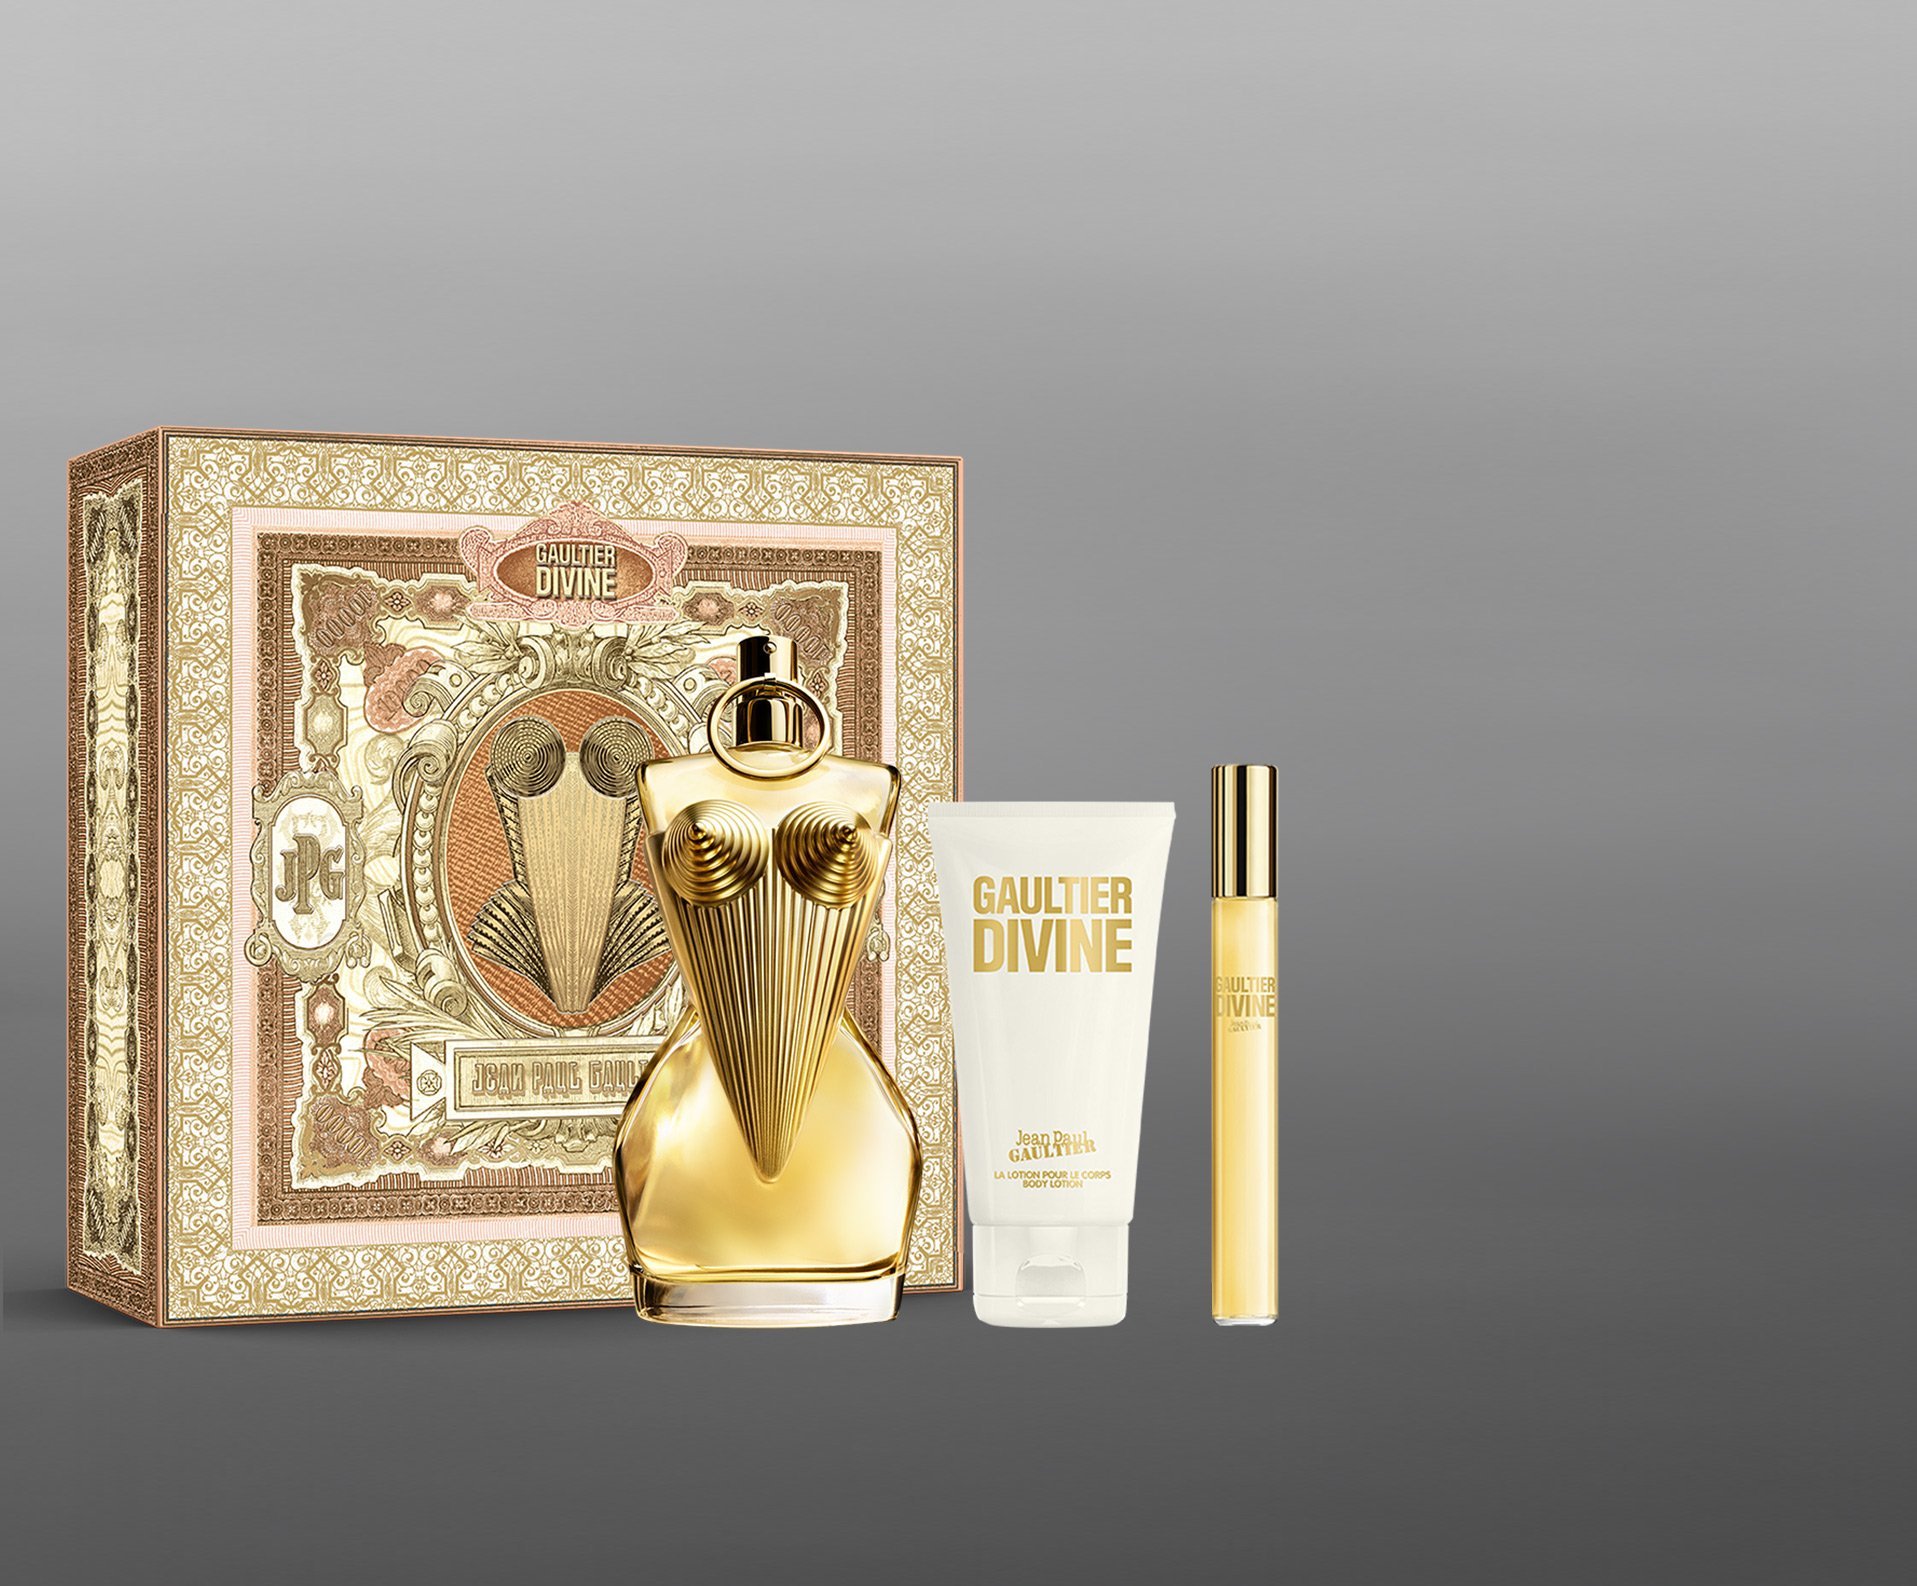 mothersday24-gift-set-gaultier-divine-100ml-body-lotion-travel-spray-jean-paul-gaultier